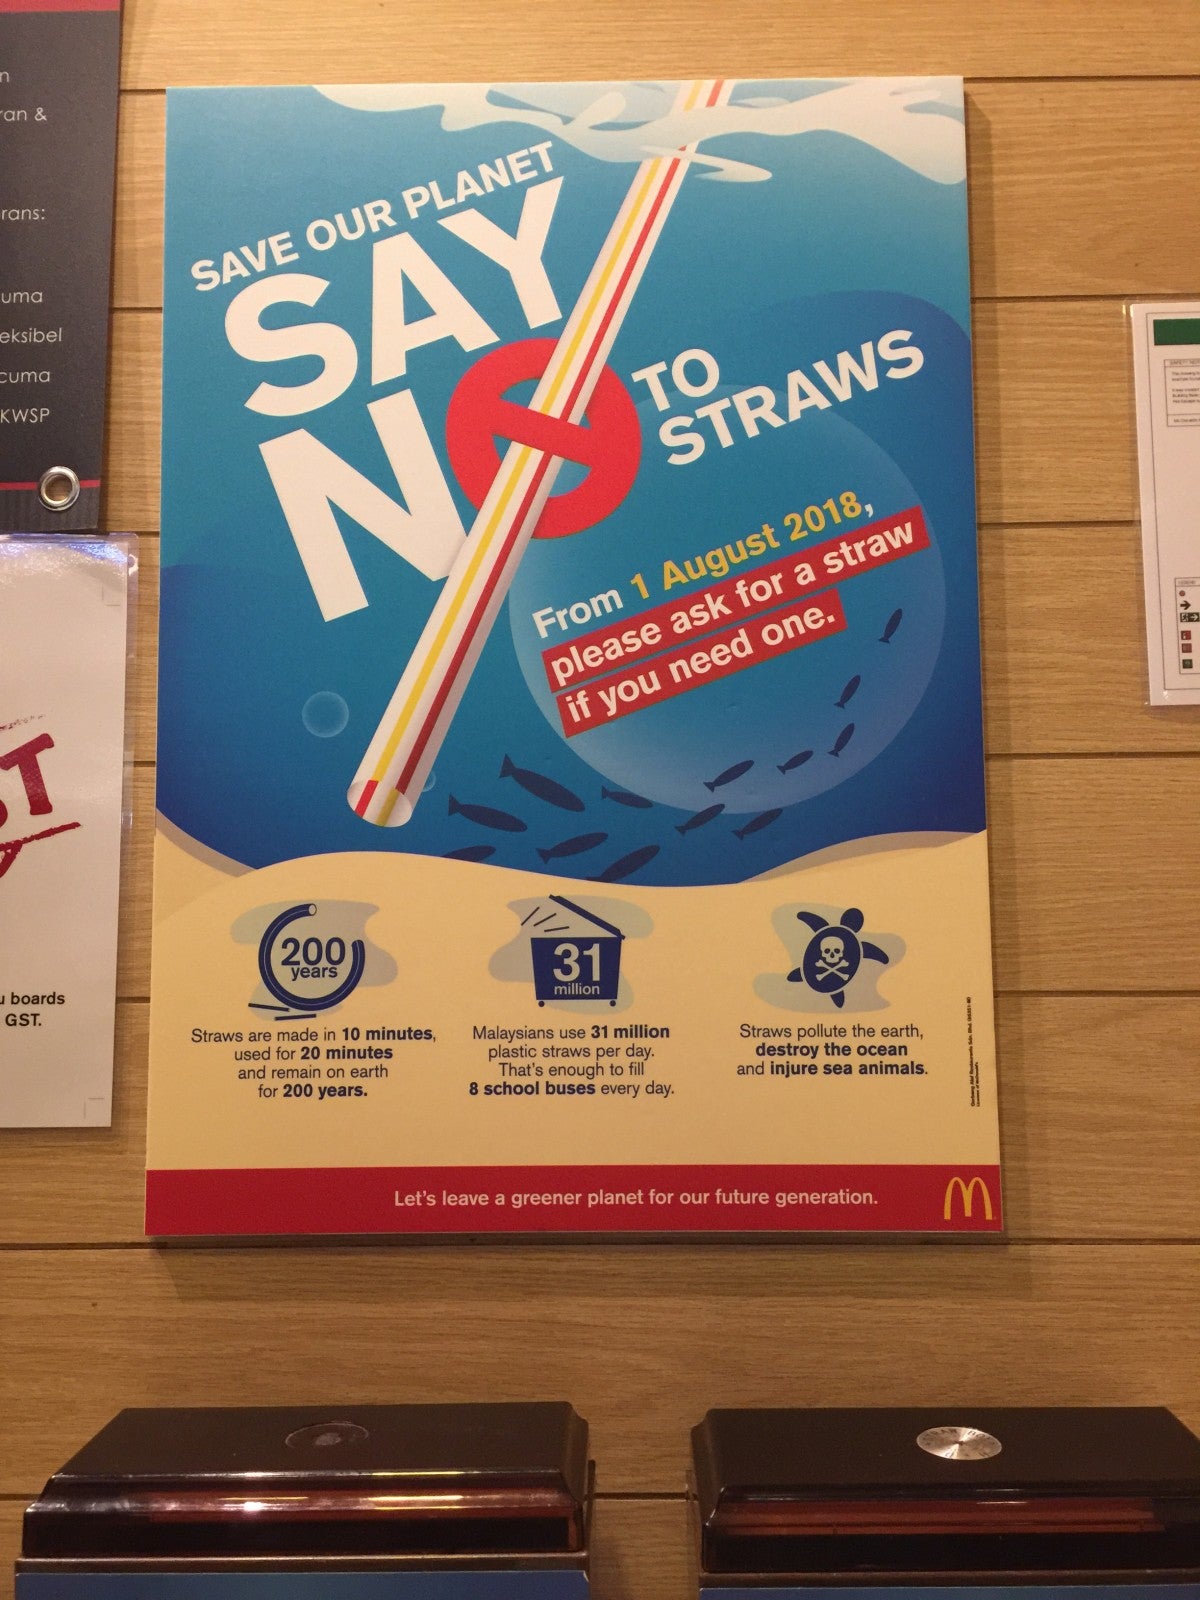 McD Malaysia Launches "Say No to Straws" Campaign